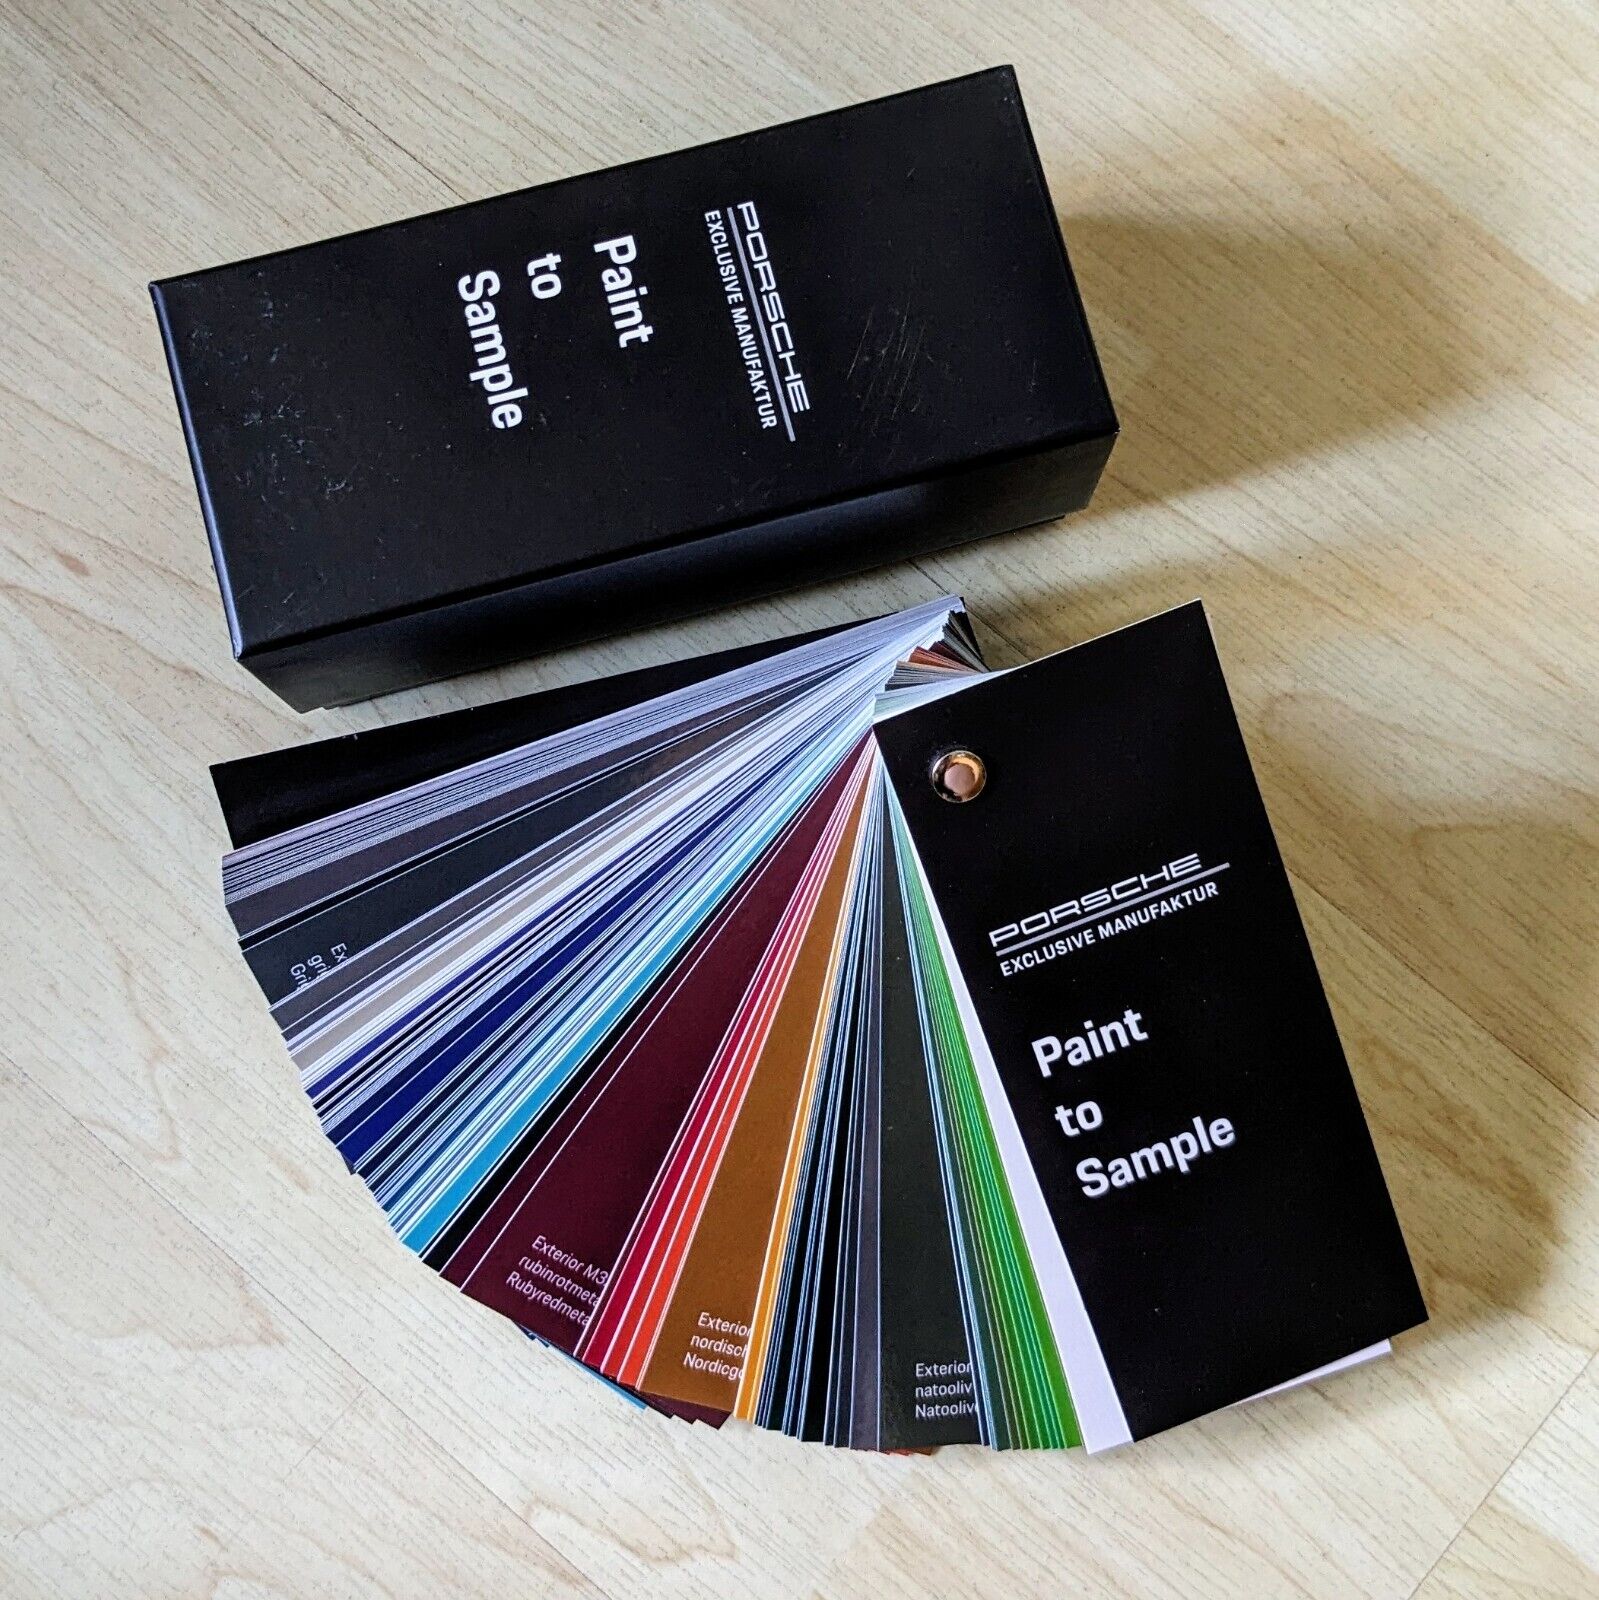 Porsche First Edition Paint to Sample (PTS) Colour Swatch Model Year P